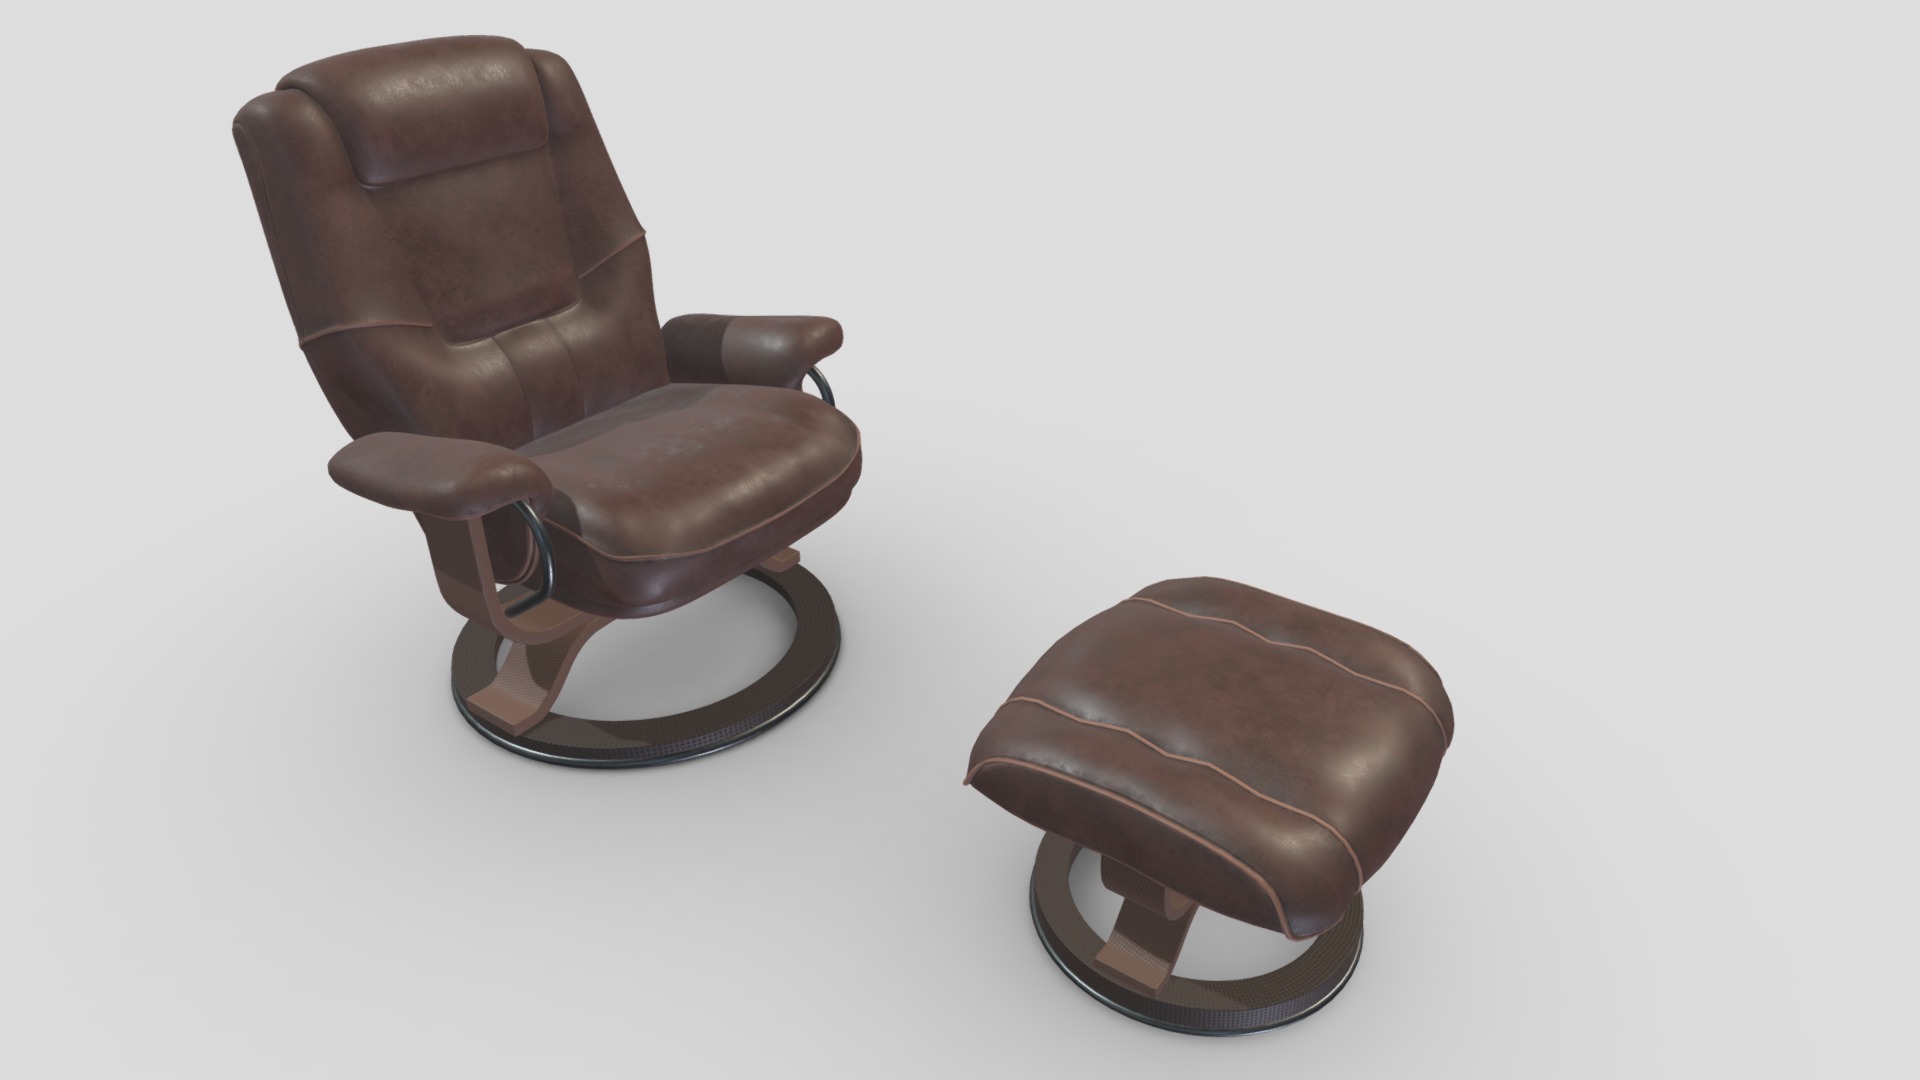 3D model Arm Chair 29 - This is a 3D model of the Arm Chair 29. The 3D model is about a pair of brown leather shoes.